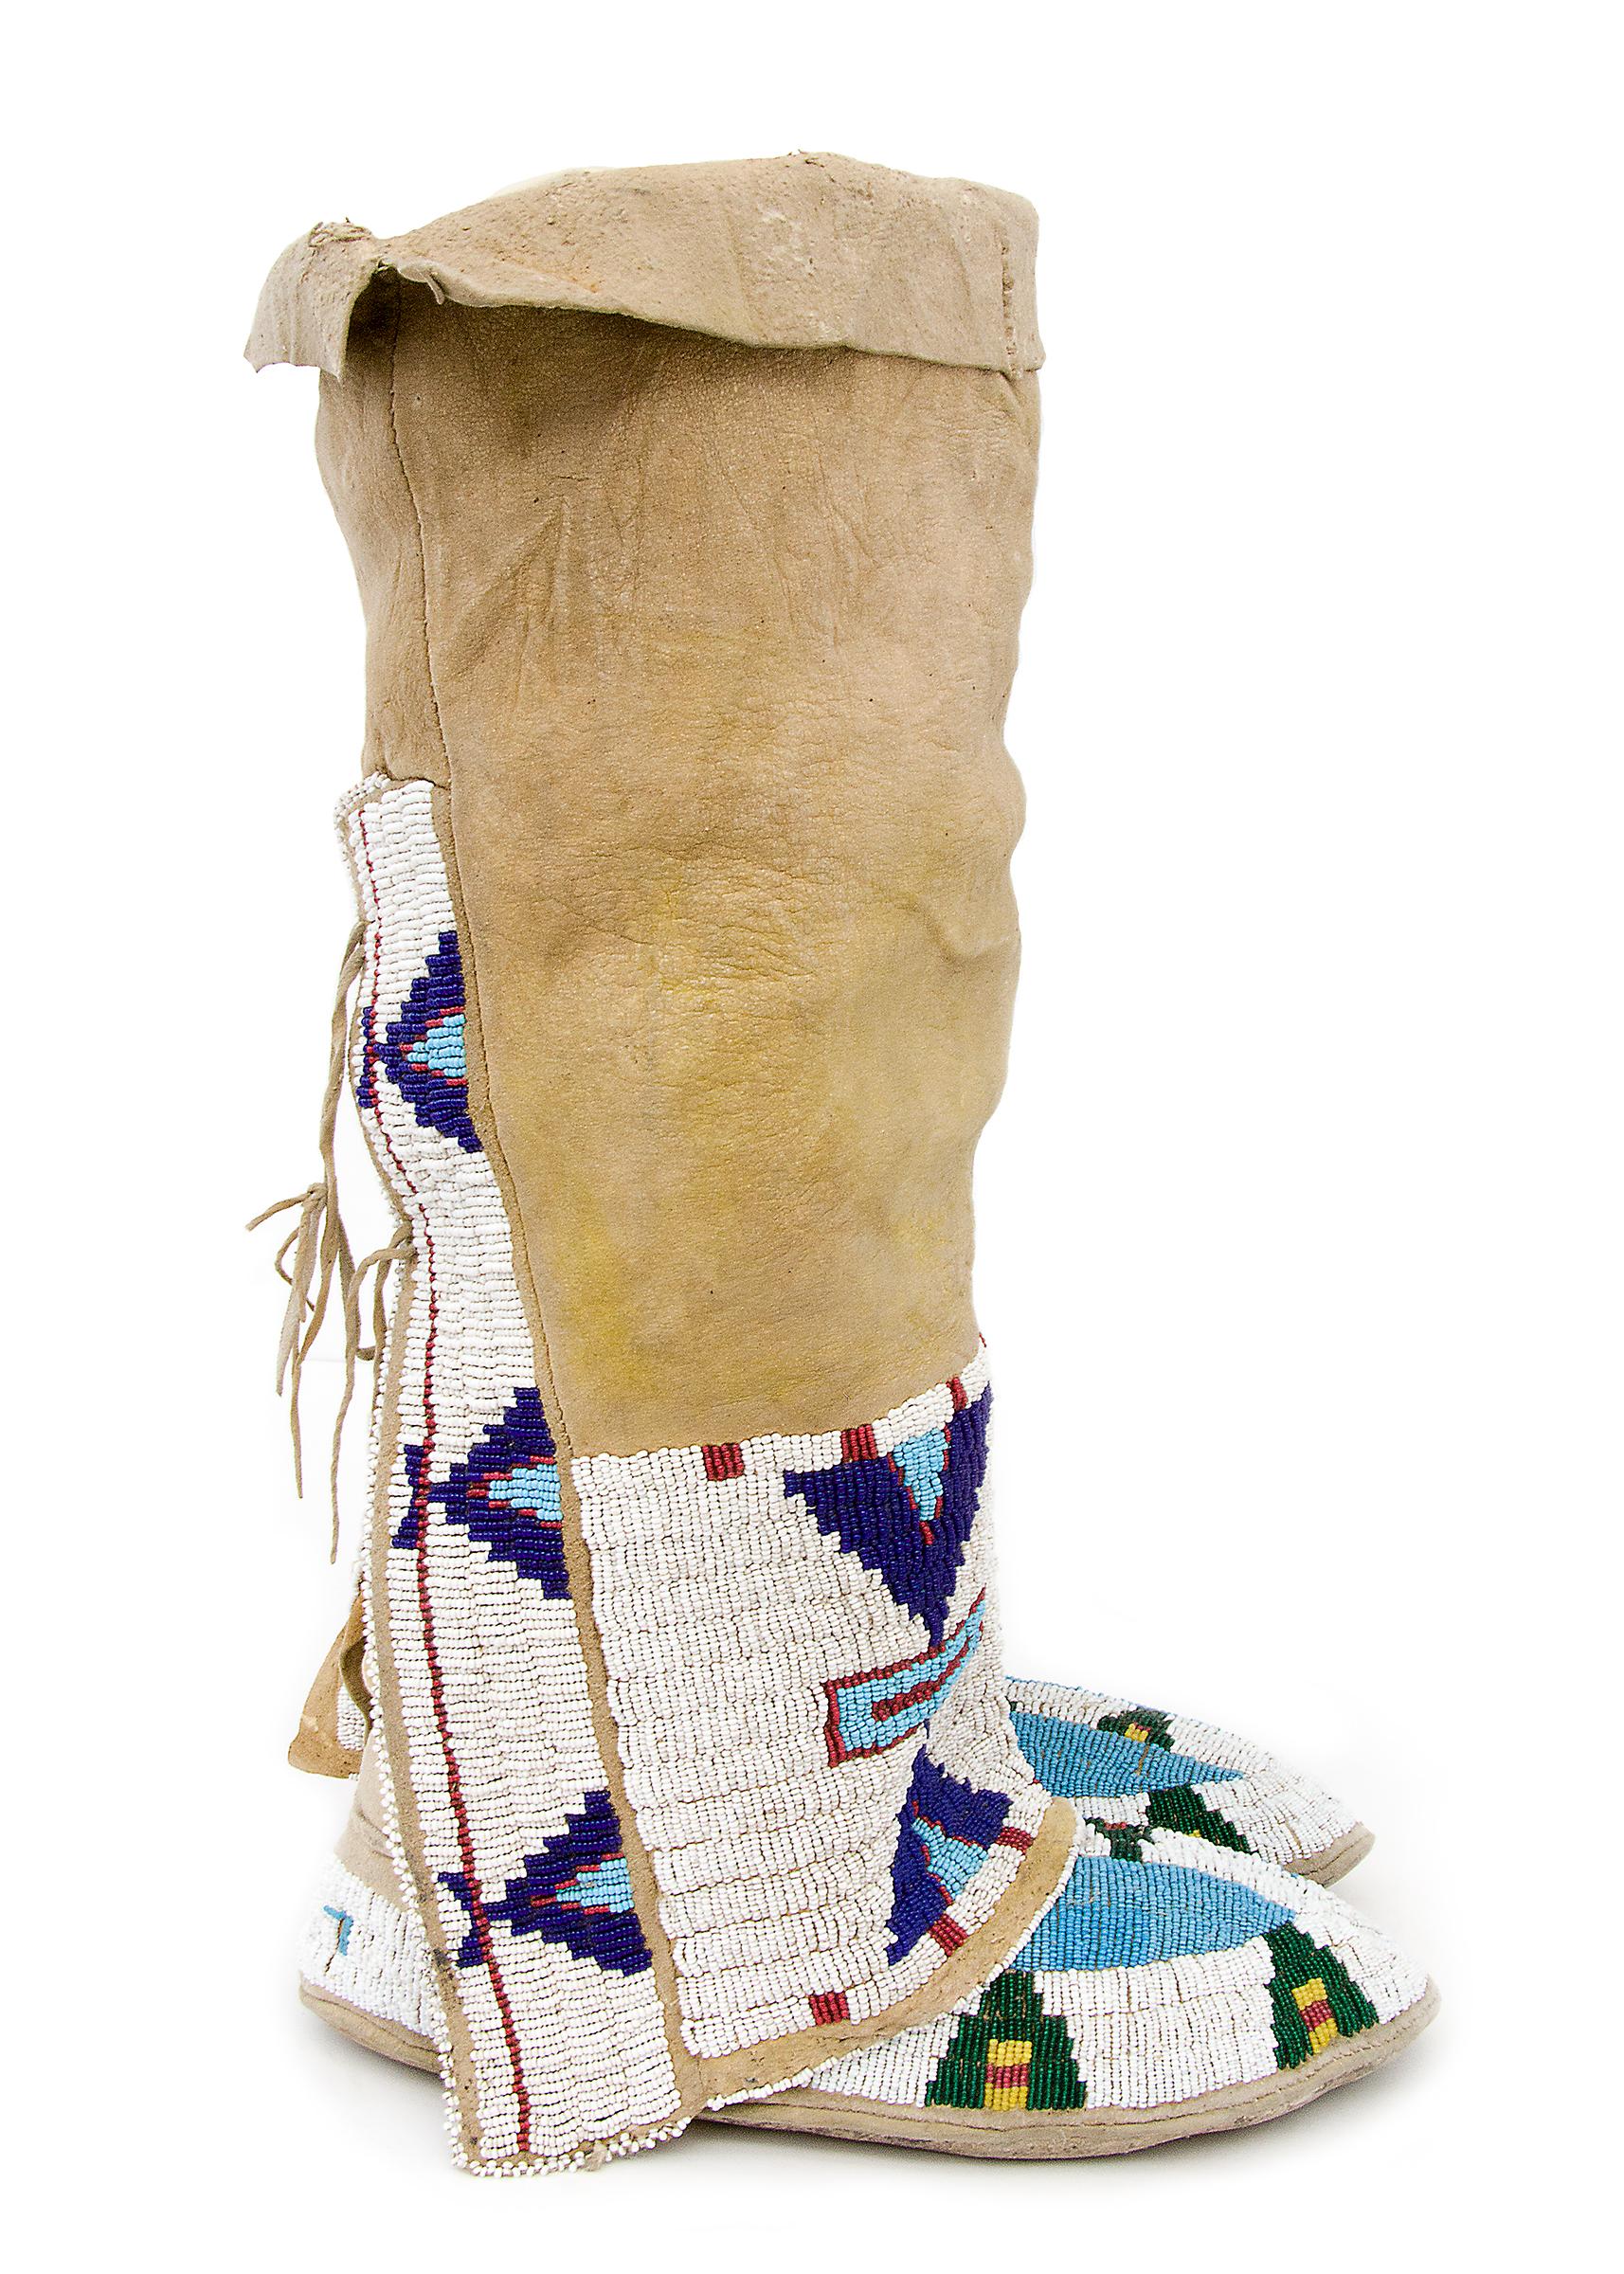 Northern Sioux moccasins and leggings, early 20th century Native American, Plains Indian beadwork. Constructed of native tanned hide with trade beads. Each moccasin has blue buffalo tracks on the vamp and teepee elements in green, yellow and red